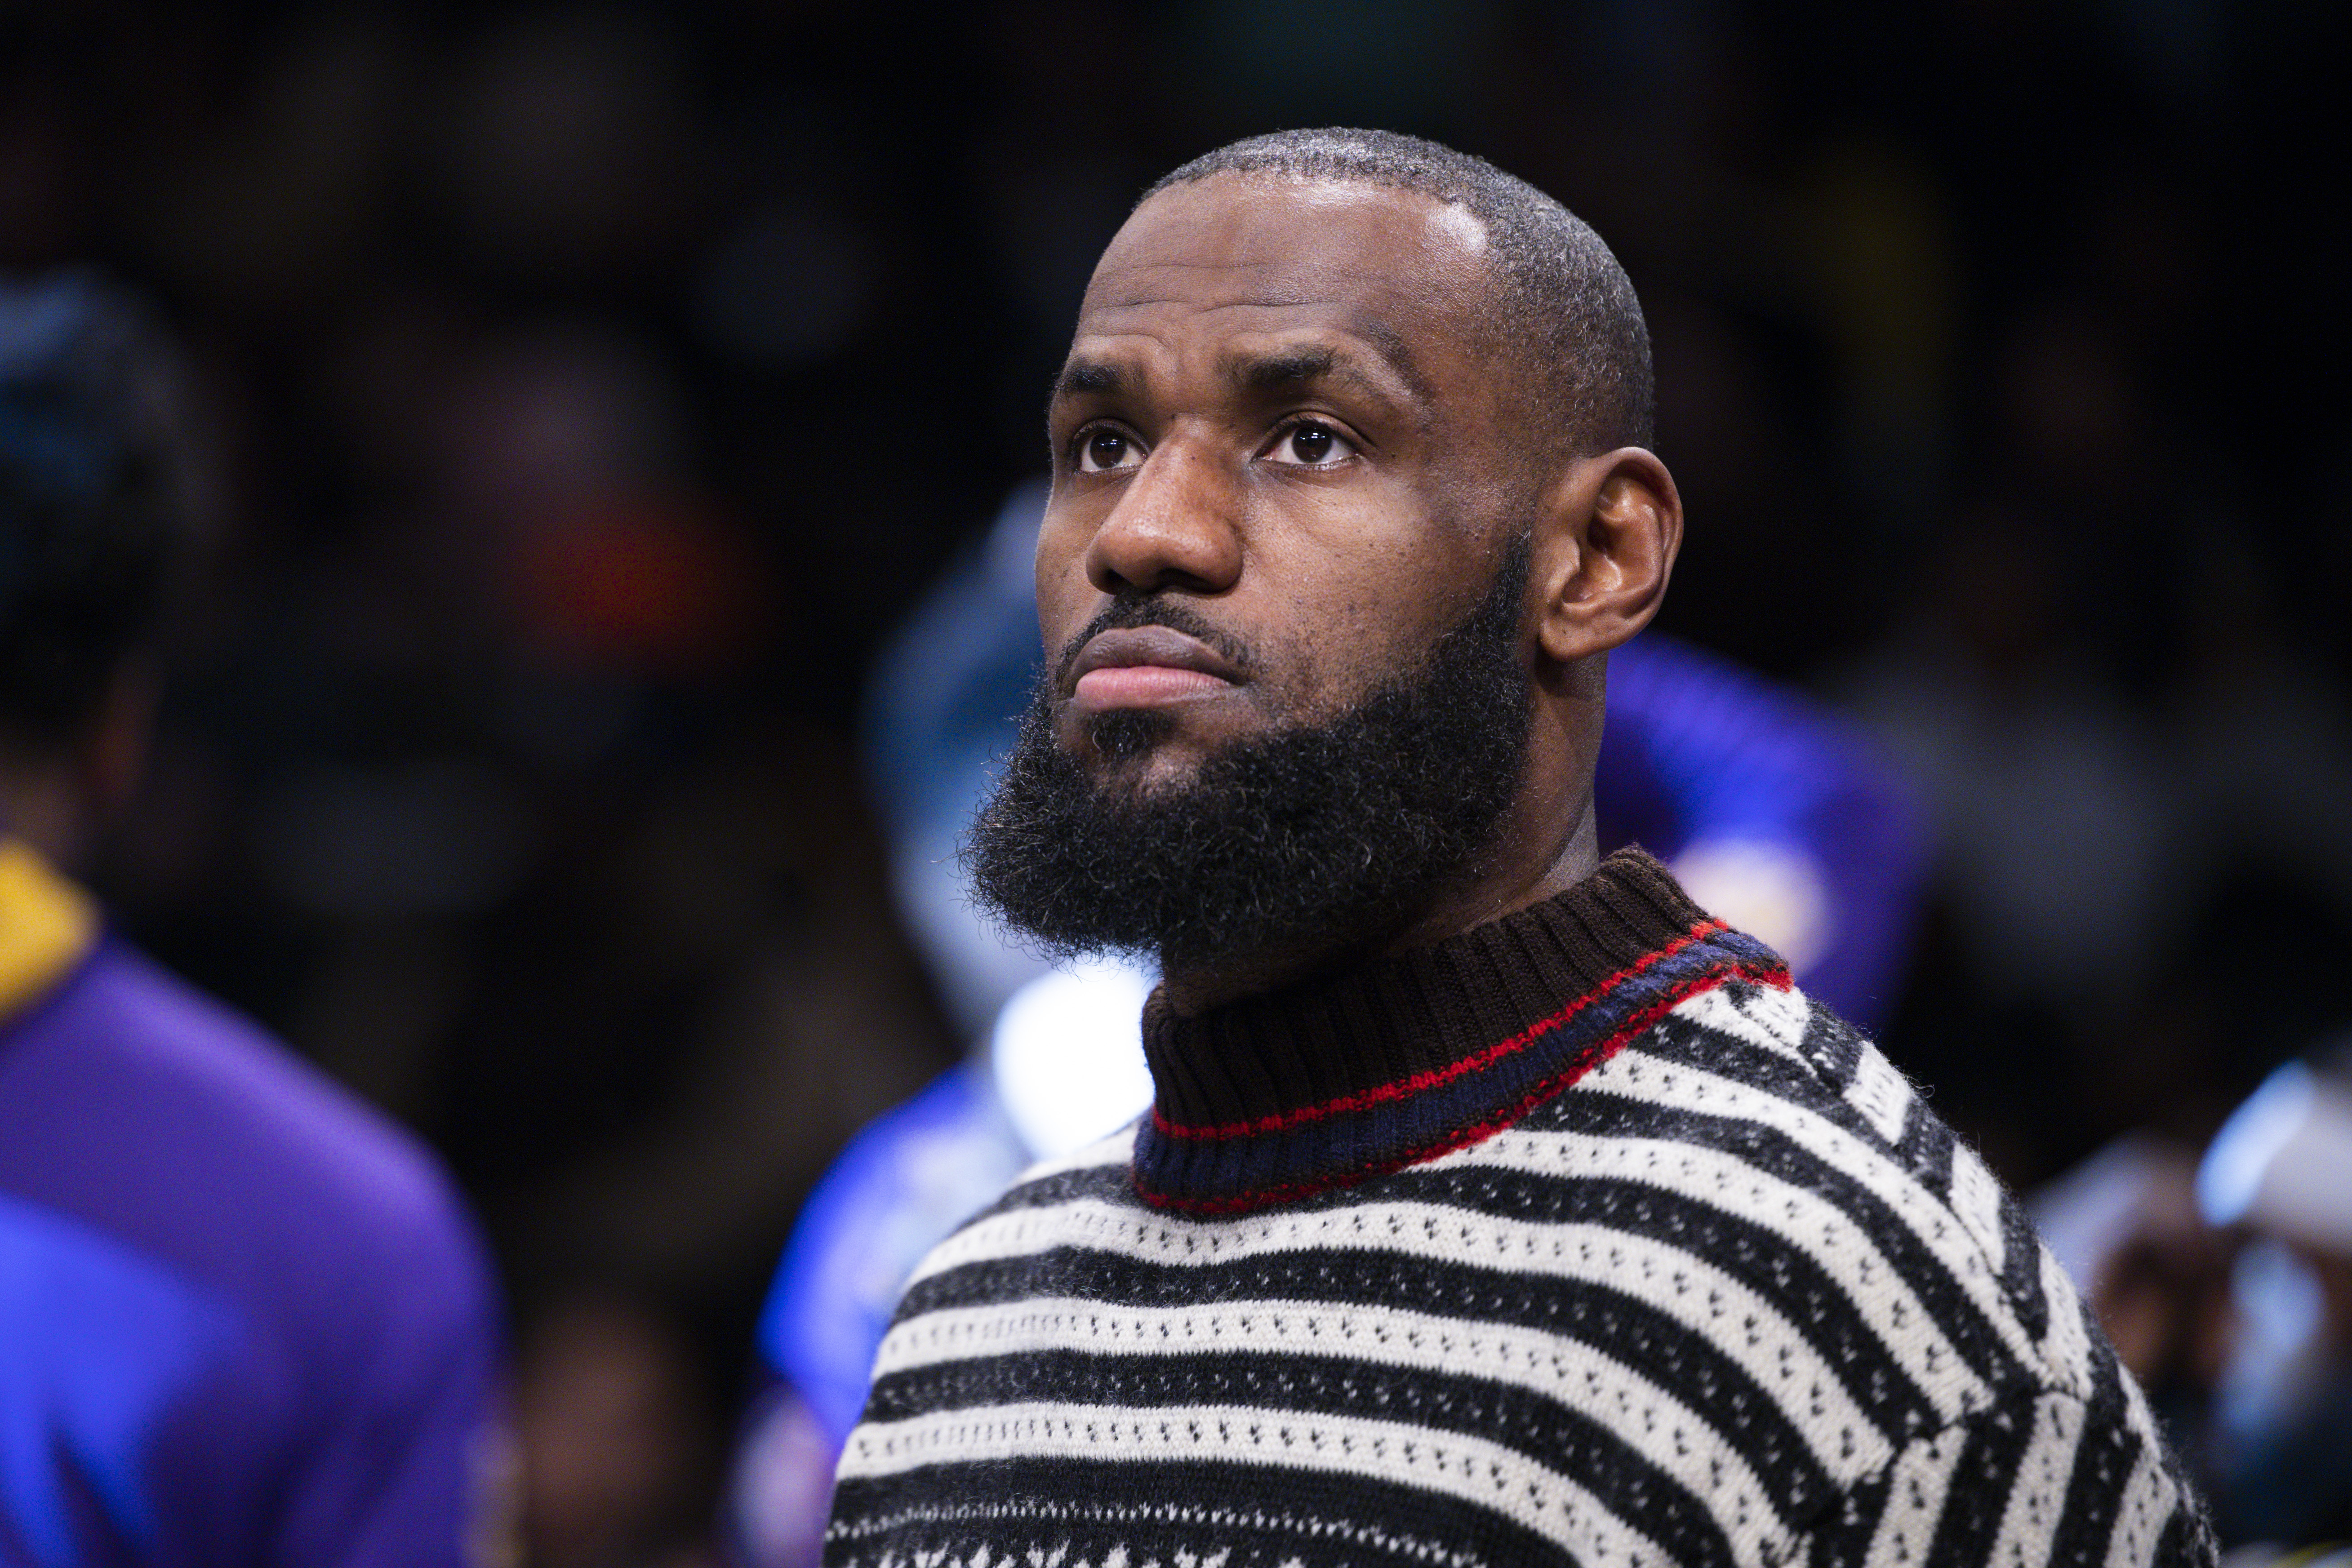 LeBron James Scores On $725 Million SpringHill Deal With Nike